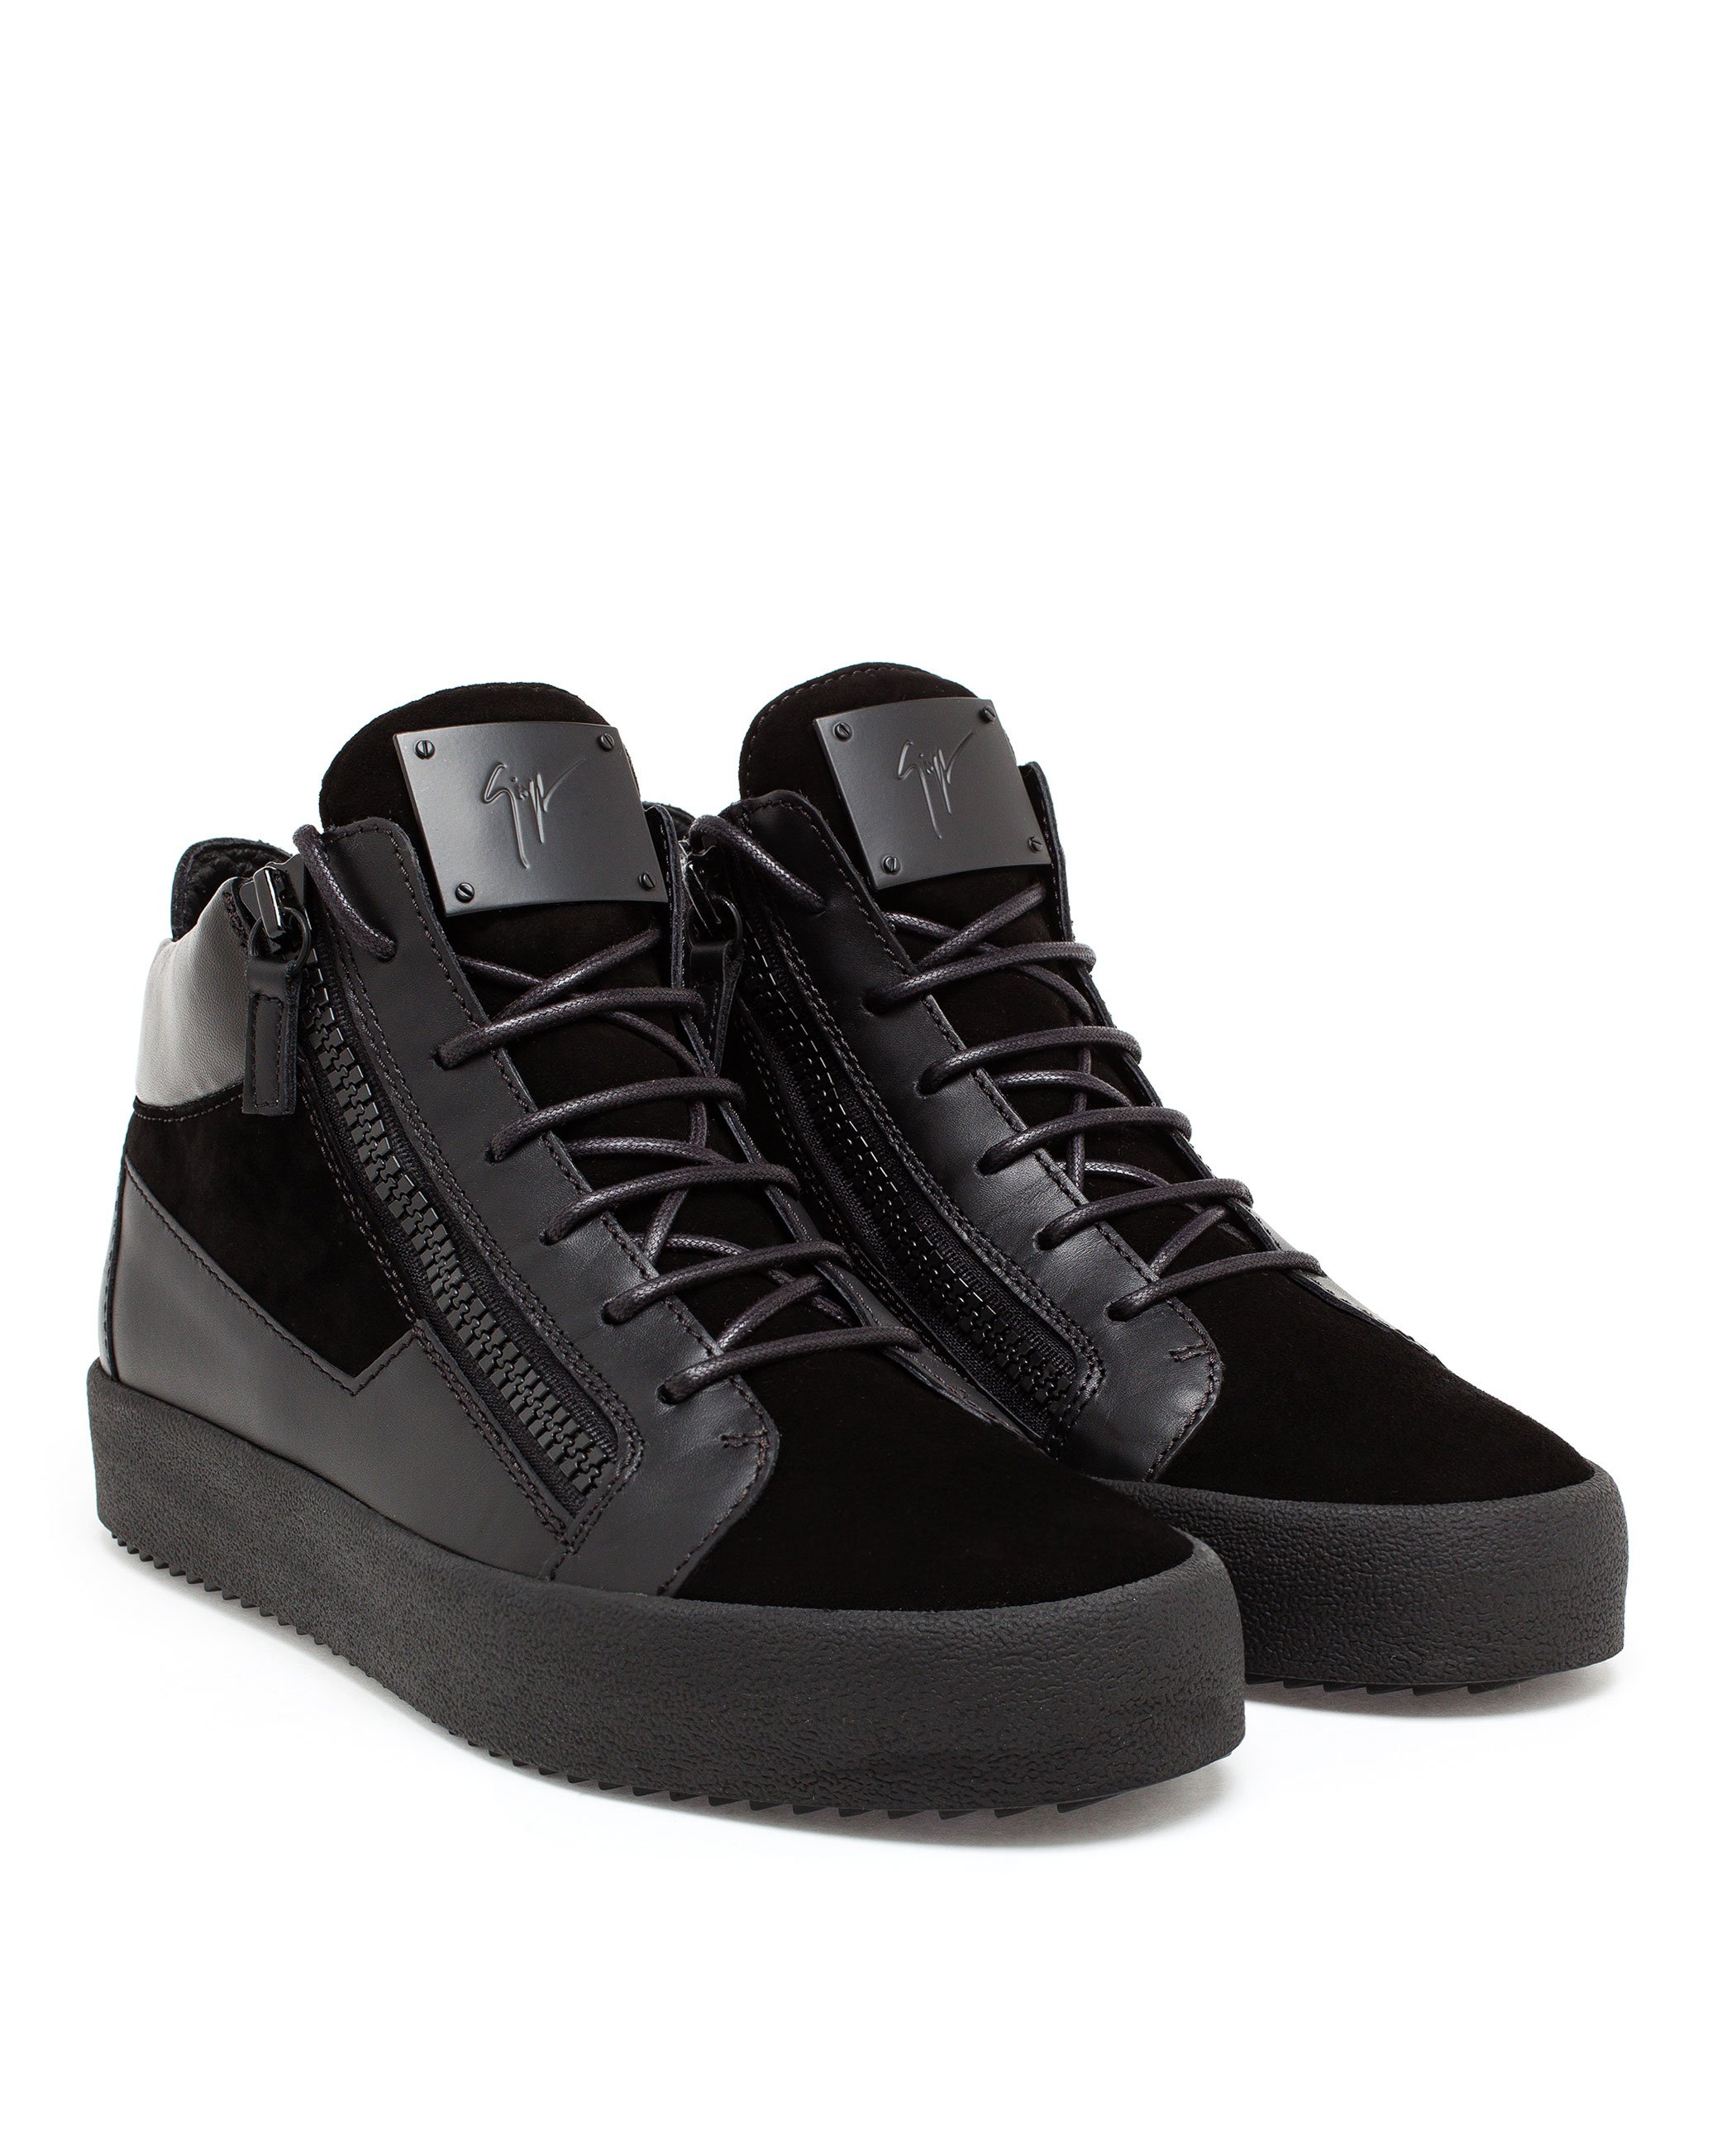 Giuseppe Zanotti Leather And Suede High Tops in Black | Lyst UK